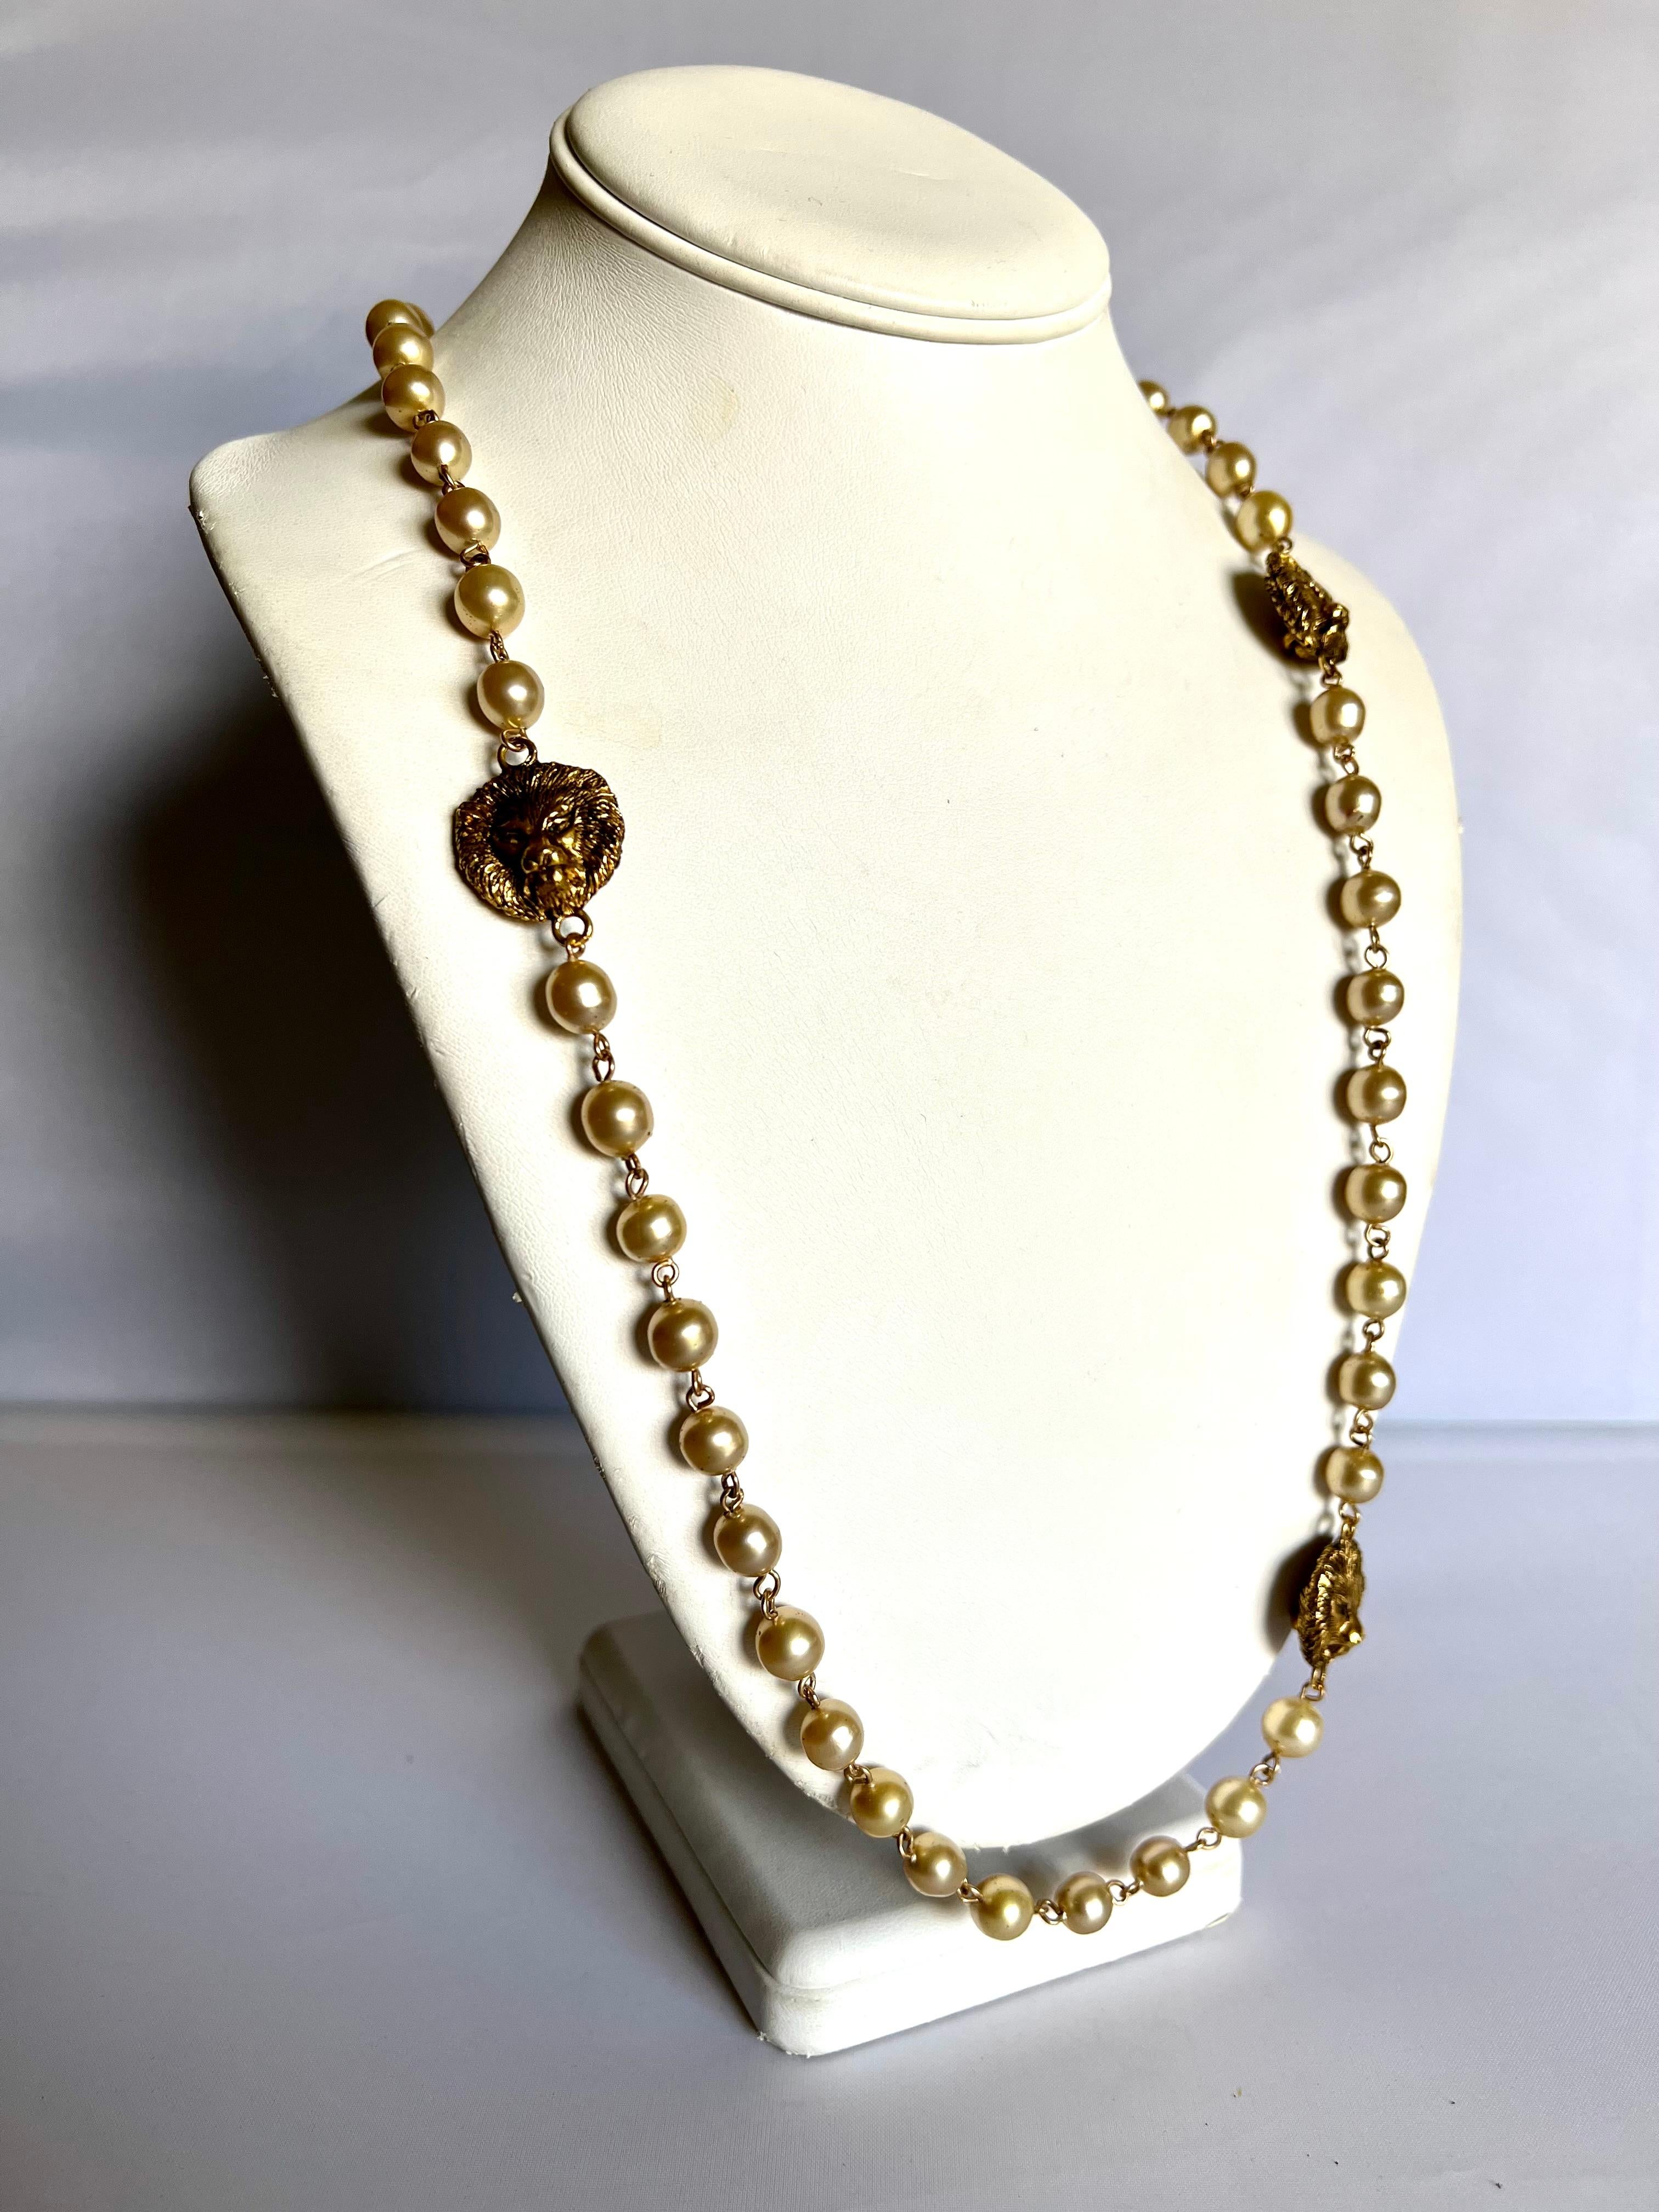 Vintage Coco Chanel gilt metal lion medallion faux glass pearl bead glass necklace, Chanel circa 1980. 